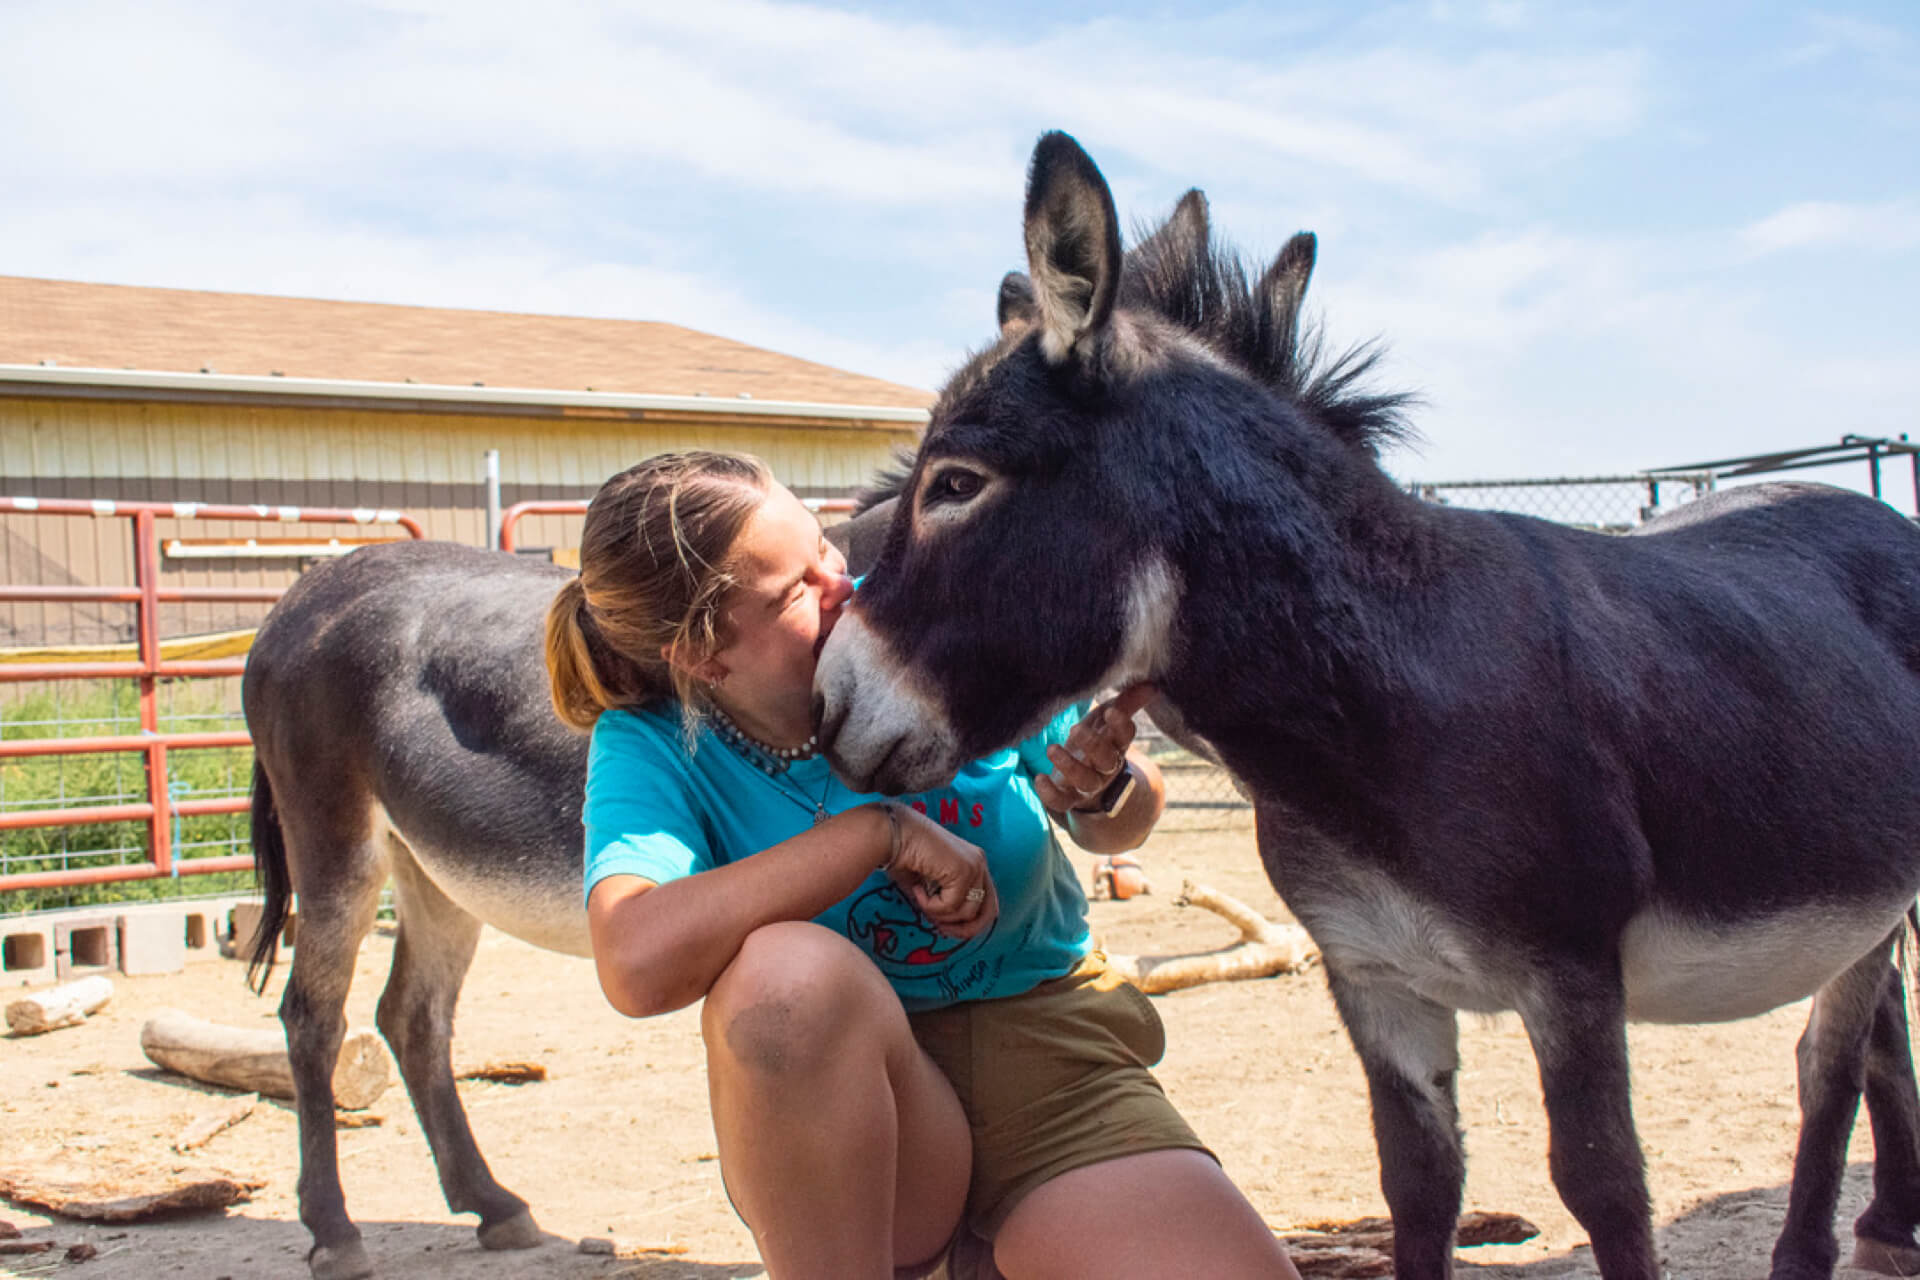 Rescued Donkey with people